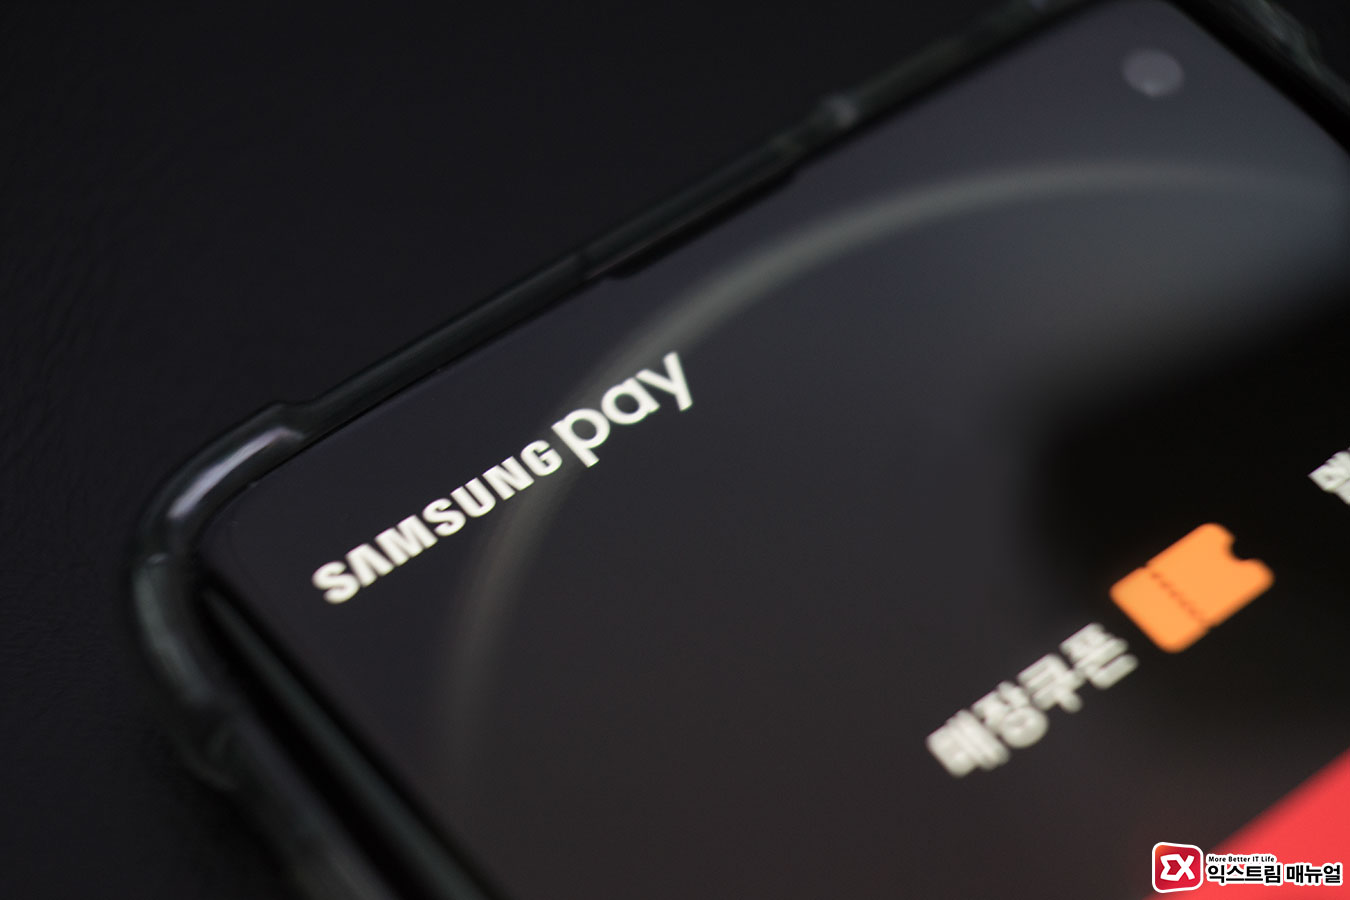 Samsung Pay Title